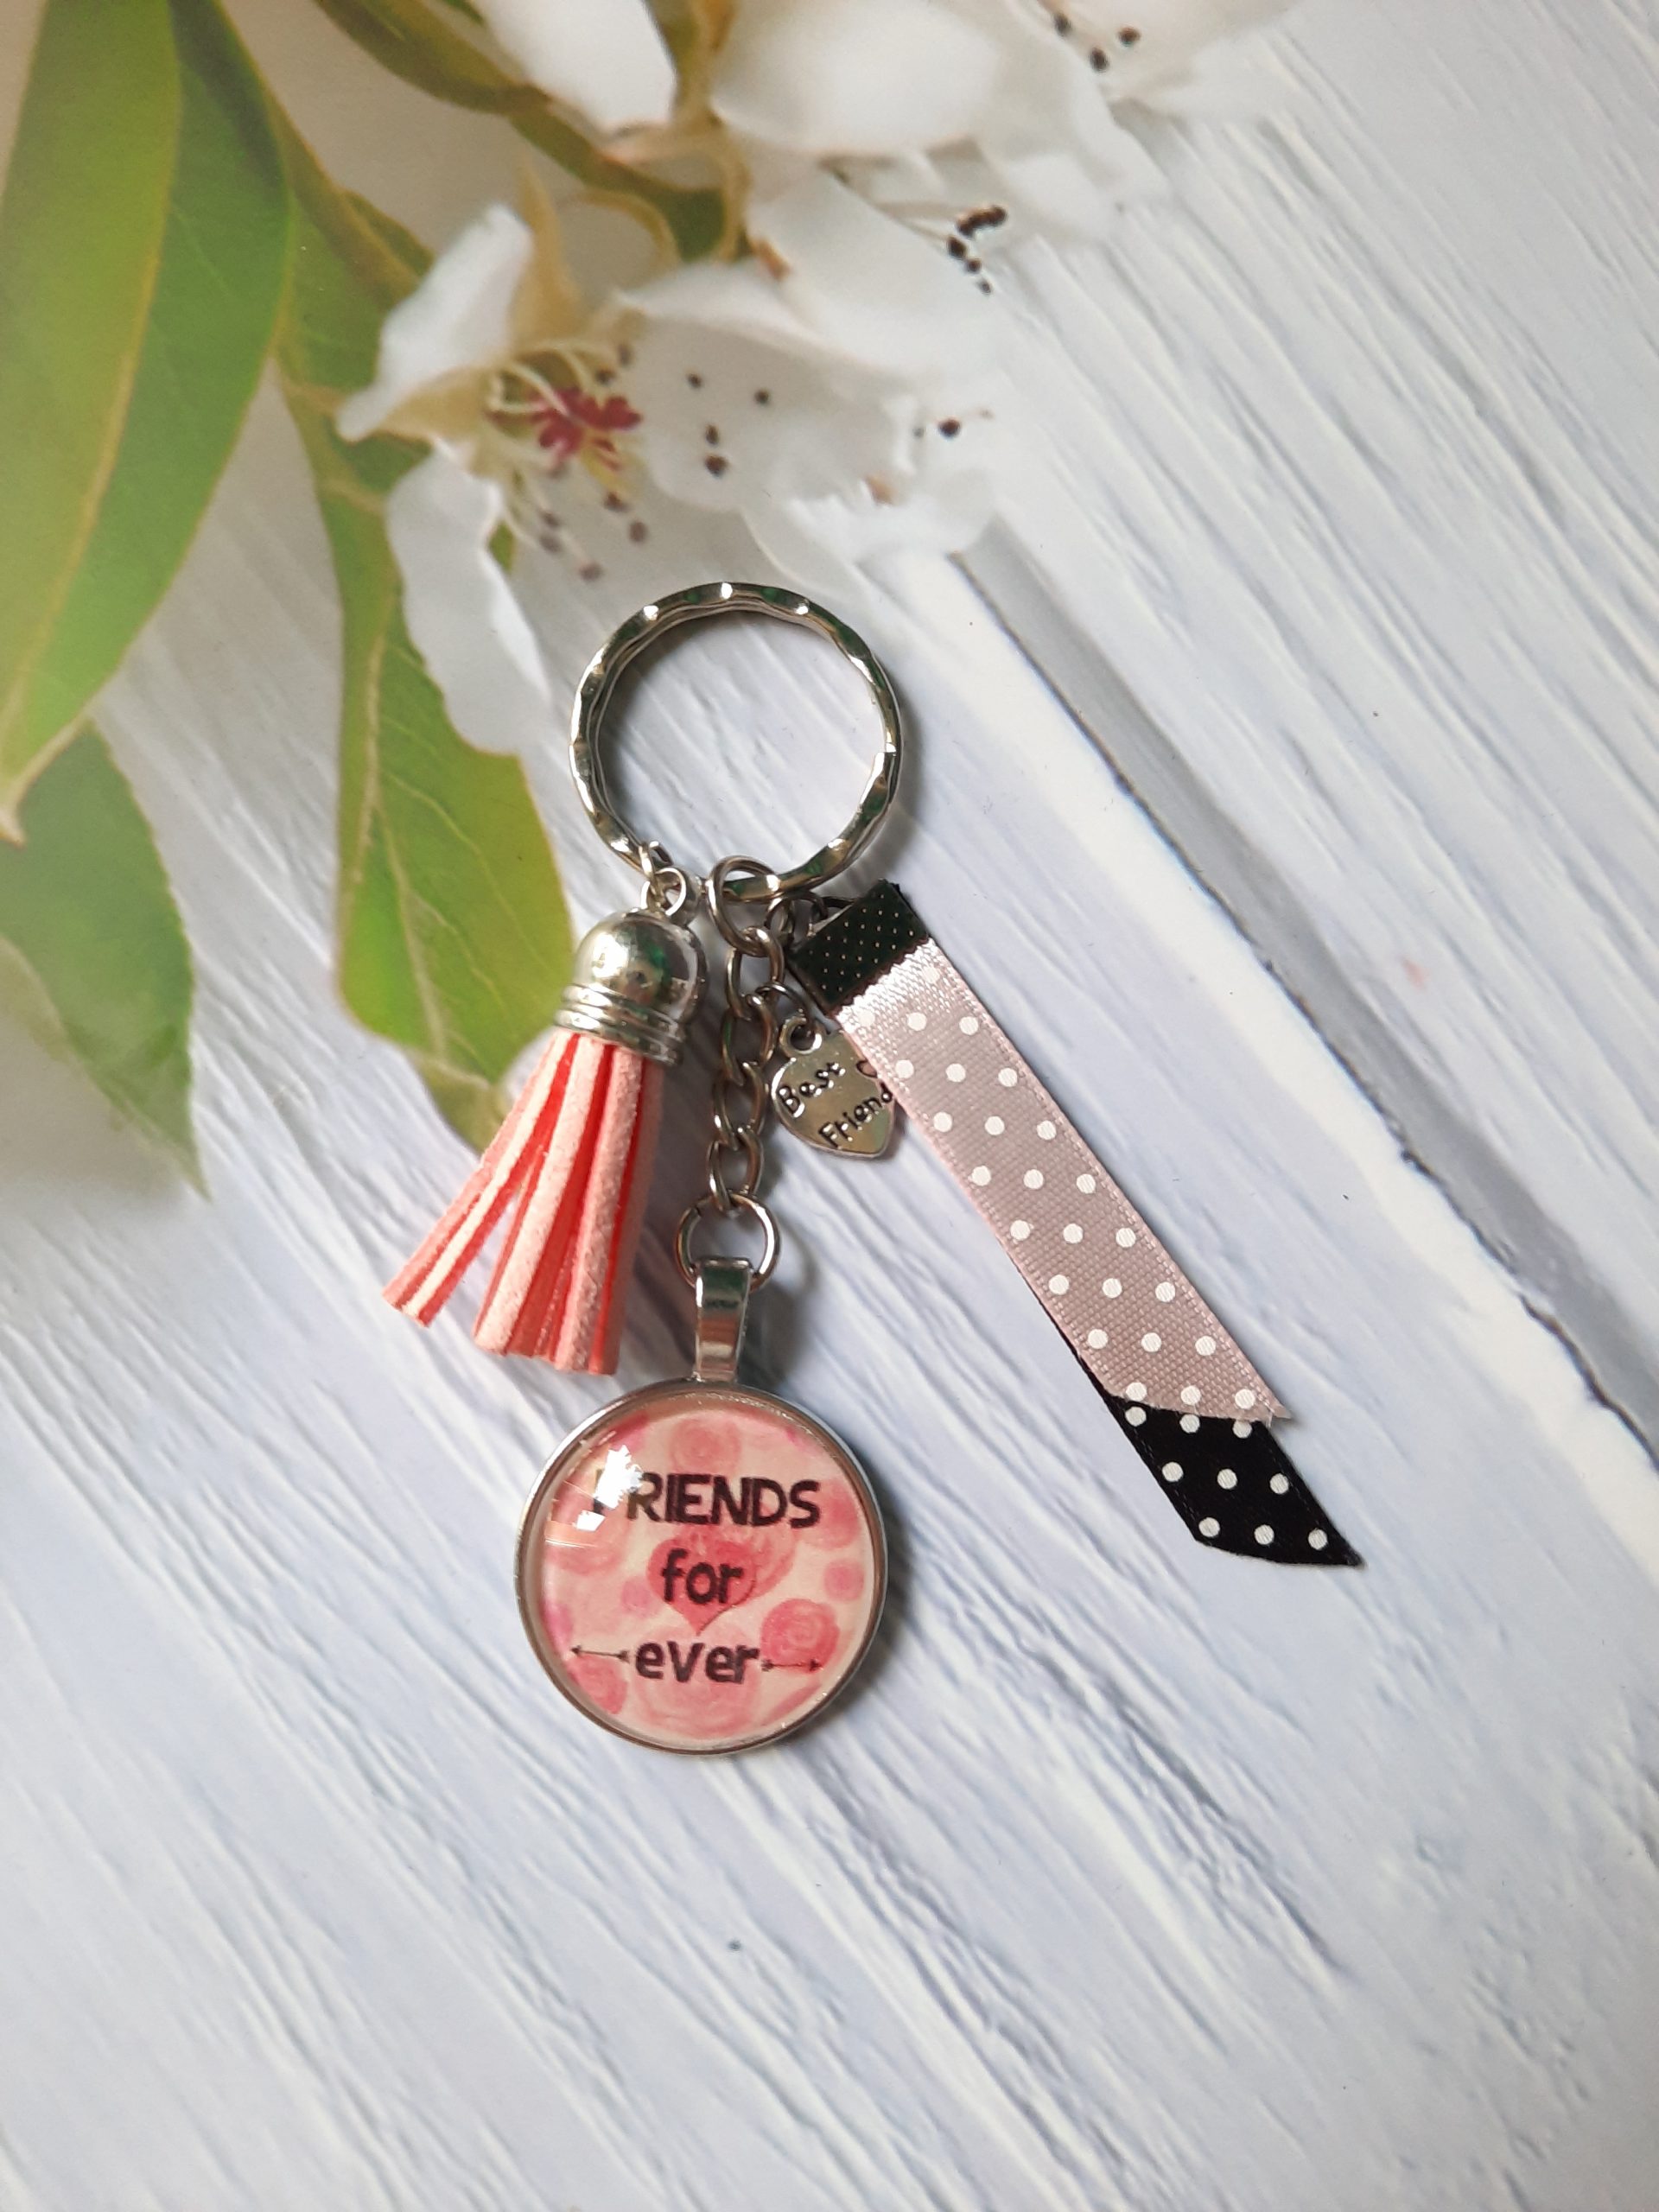 Porte clefs cabochon blackpink - Cdiscount Bagagerie - Maroquinerie